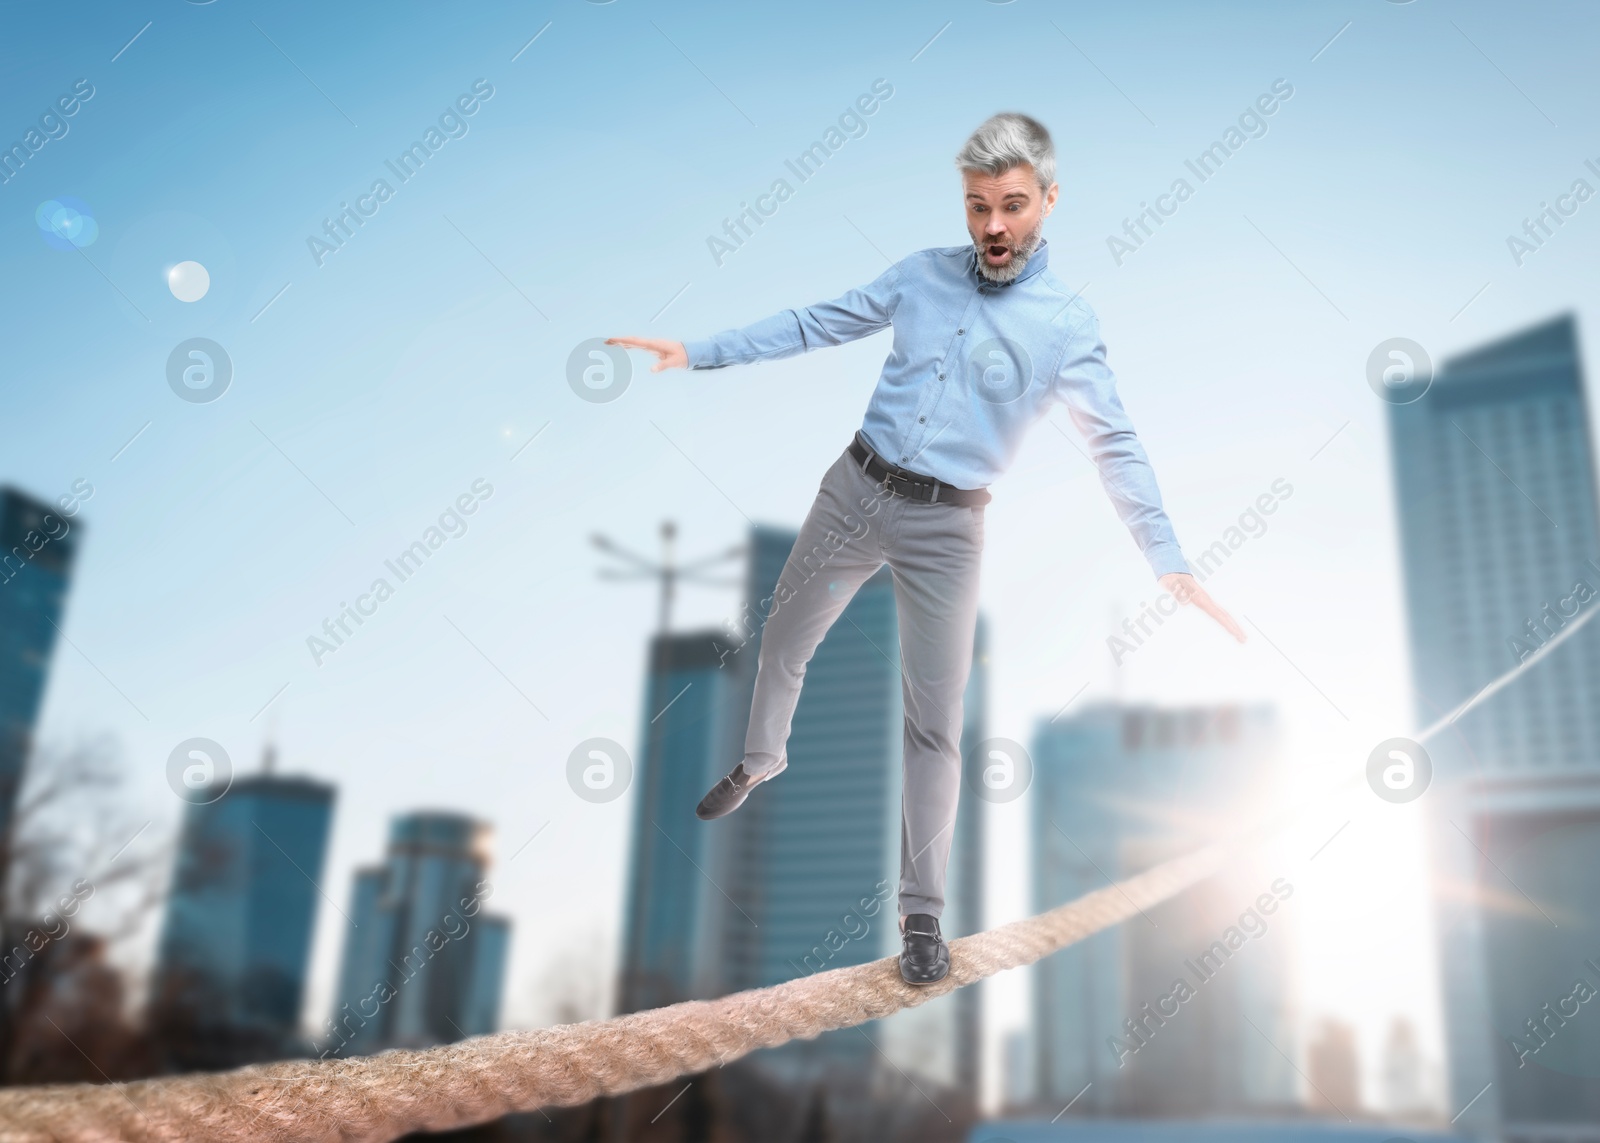 Image of Concentrated businessman balancing on rope over city. Concept of risk